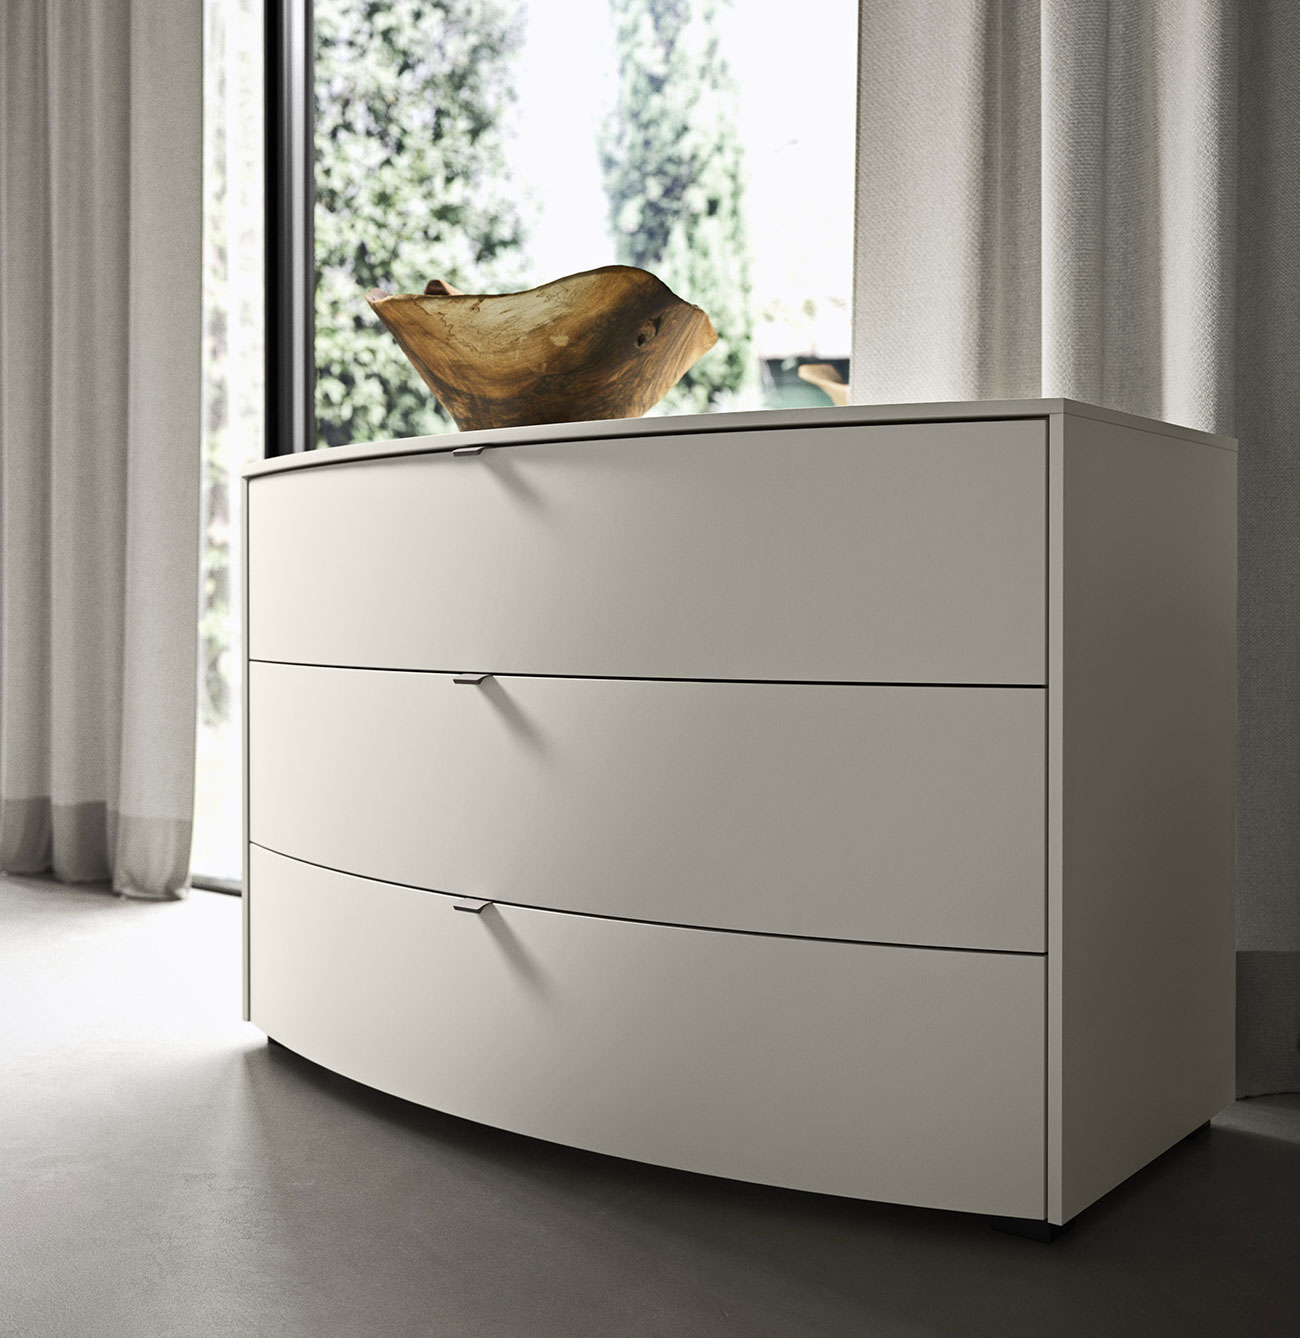 classy drawer units, bedsides and chests of drawers